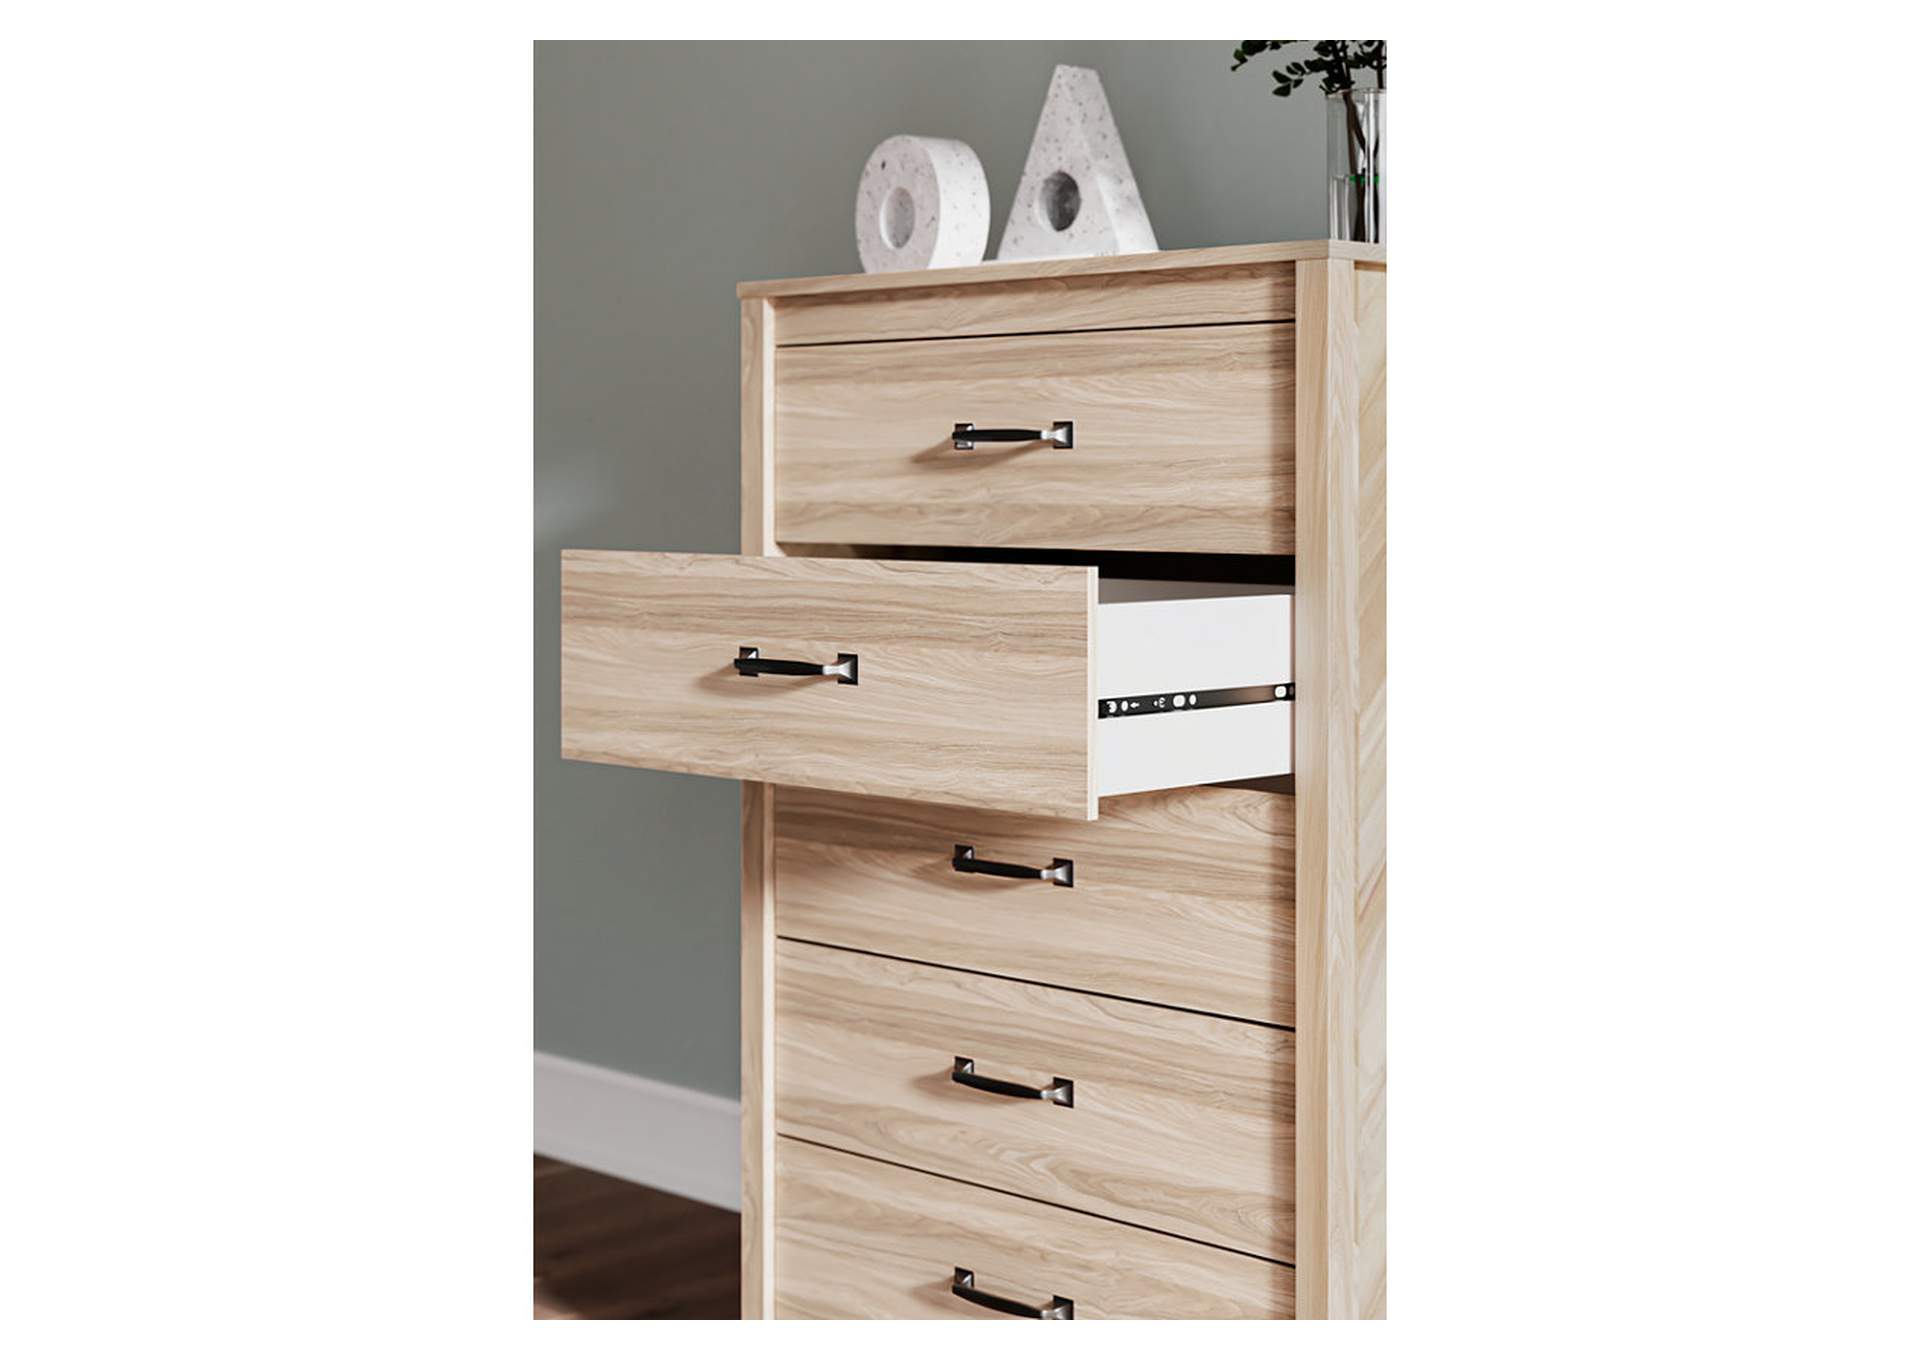 Battelle Chest of Drawers,Signature Design By Ashley